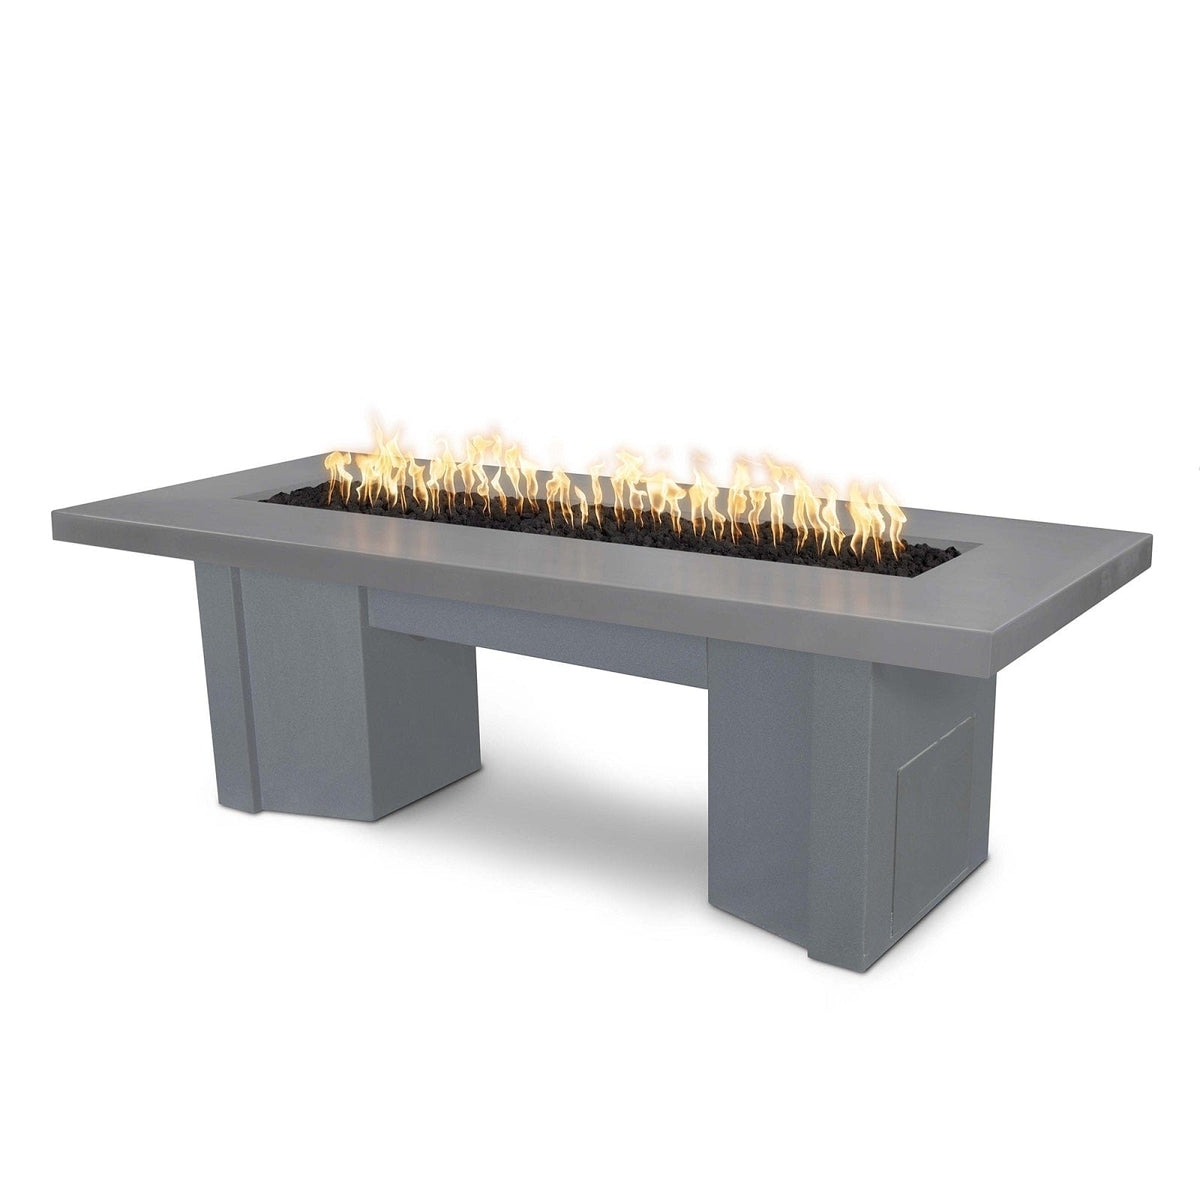 The Outdoor Plus Fire Features Natural Gray (-NGY) / Gray Powder Coated Steel (-GRY) The Outdoor Plus 60&quot; Alameda Fire Table Smooth Concrete in Natural Gas - Match Lit with Flame Sense System / OPT-ALMGFRC60FSML-NG